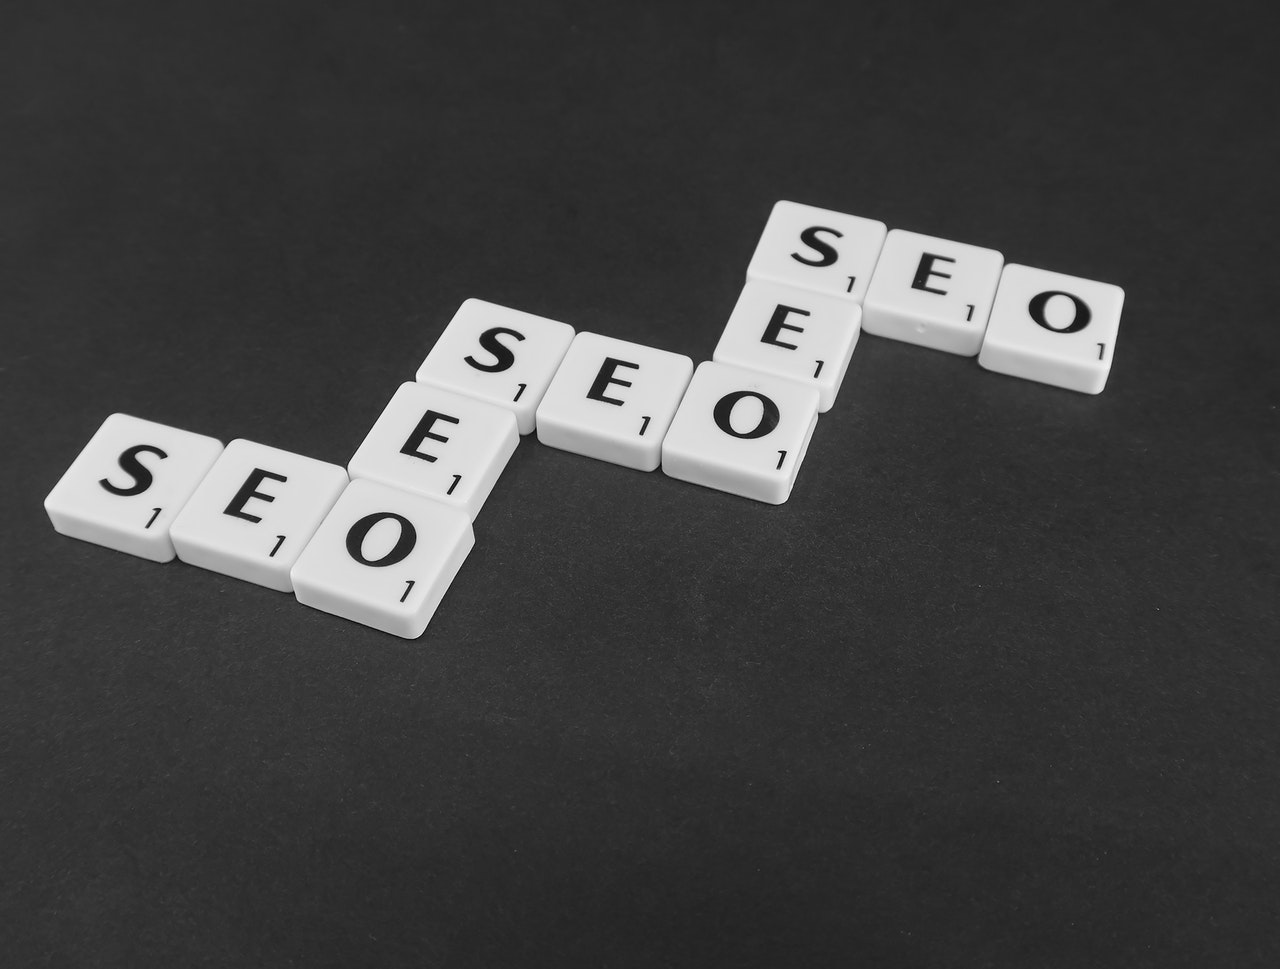 Keyword Research to Build Your Online Business